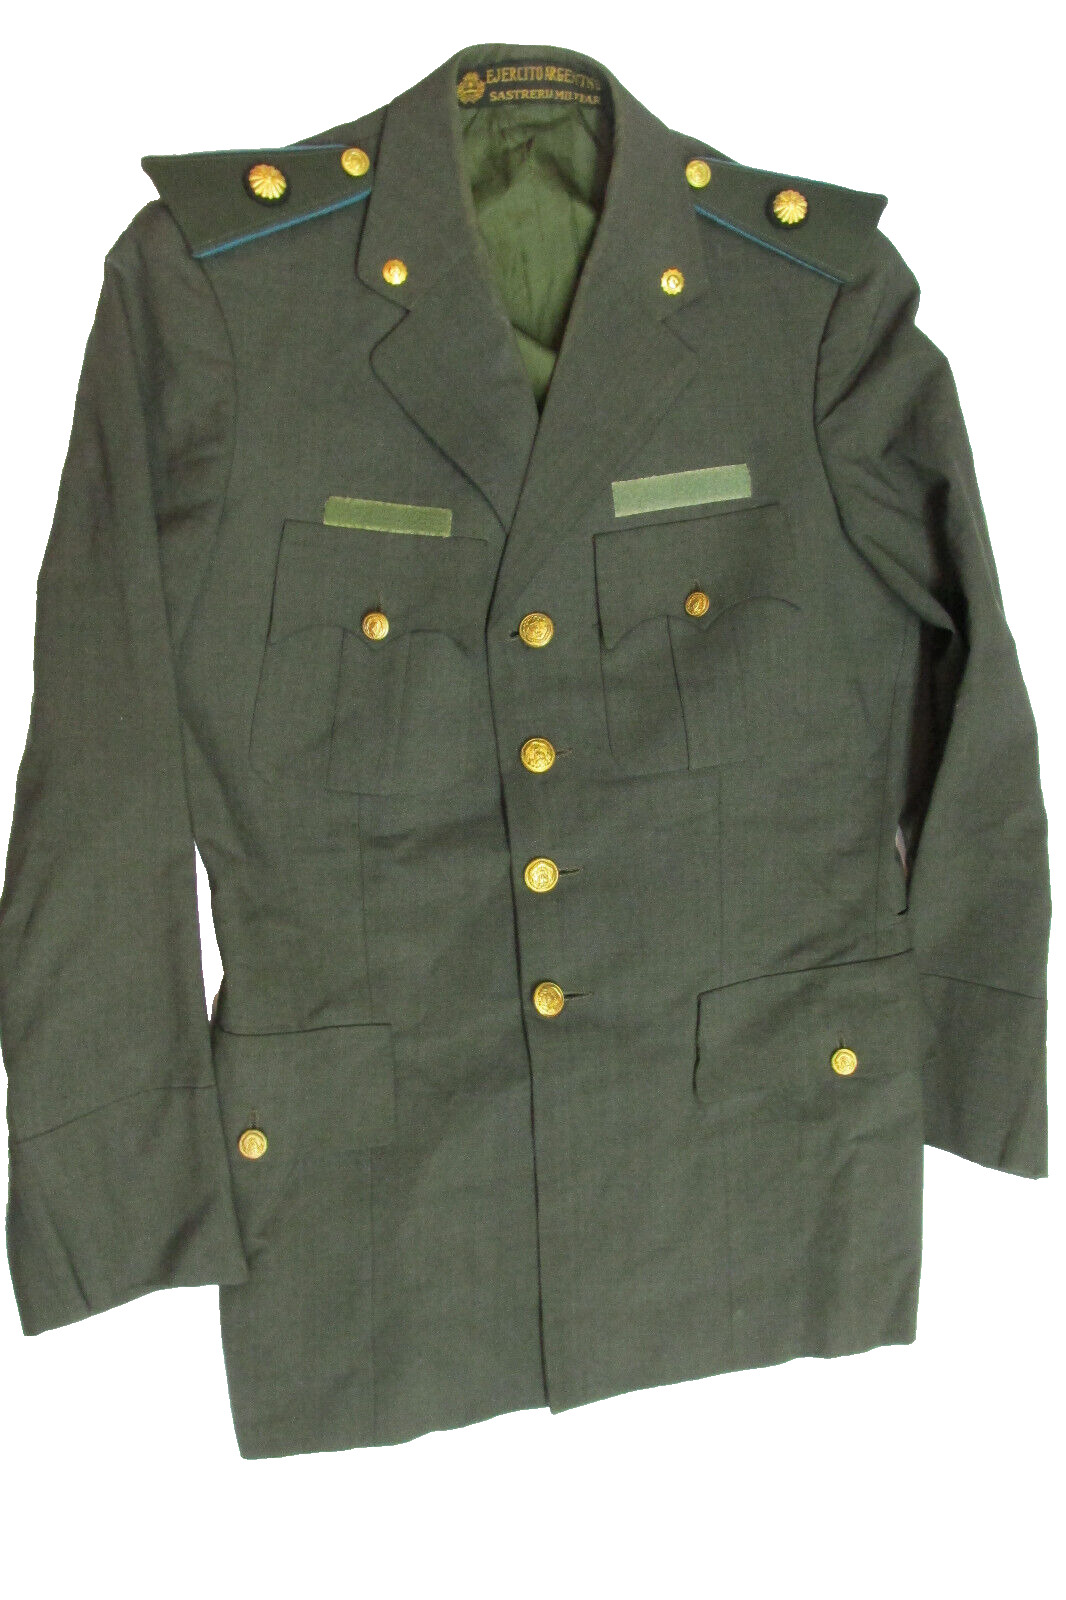 Interesting Captain's jacket of the Argentine Army Military Tailor 1960